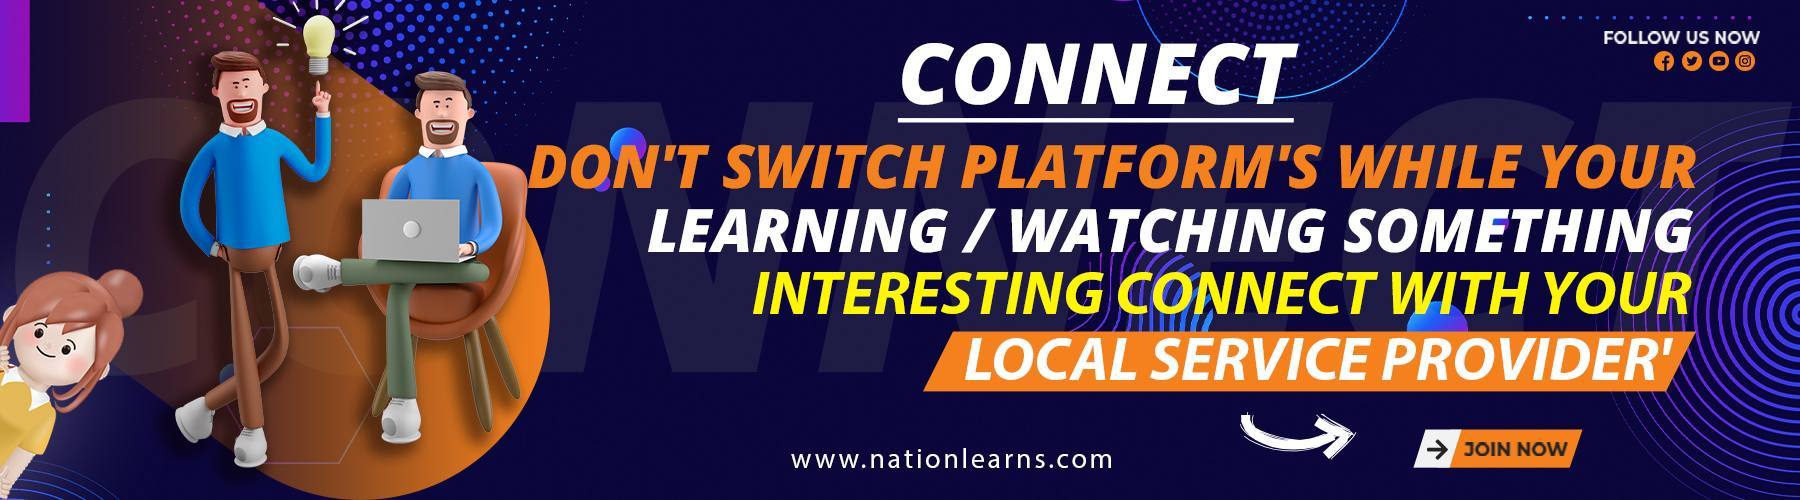 Nation Learns Connect